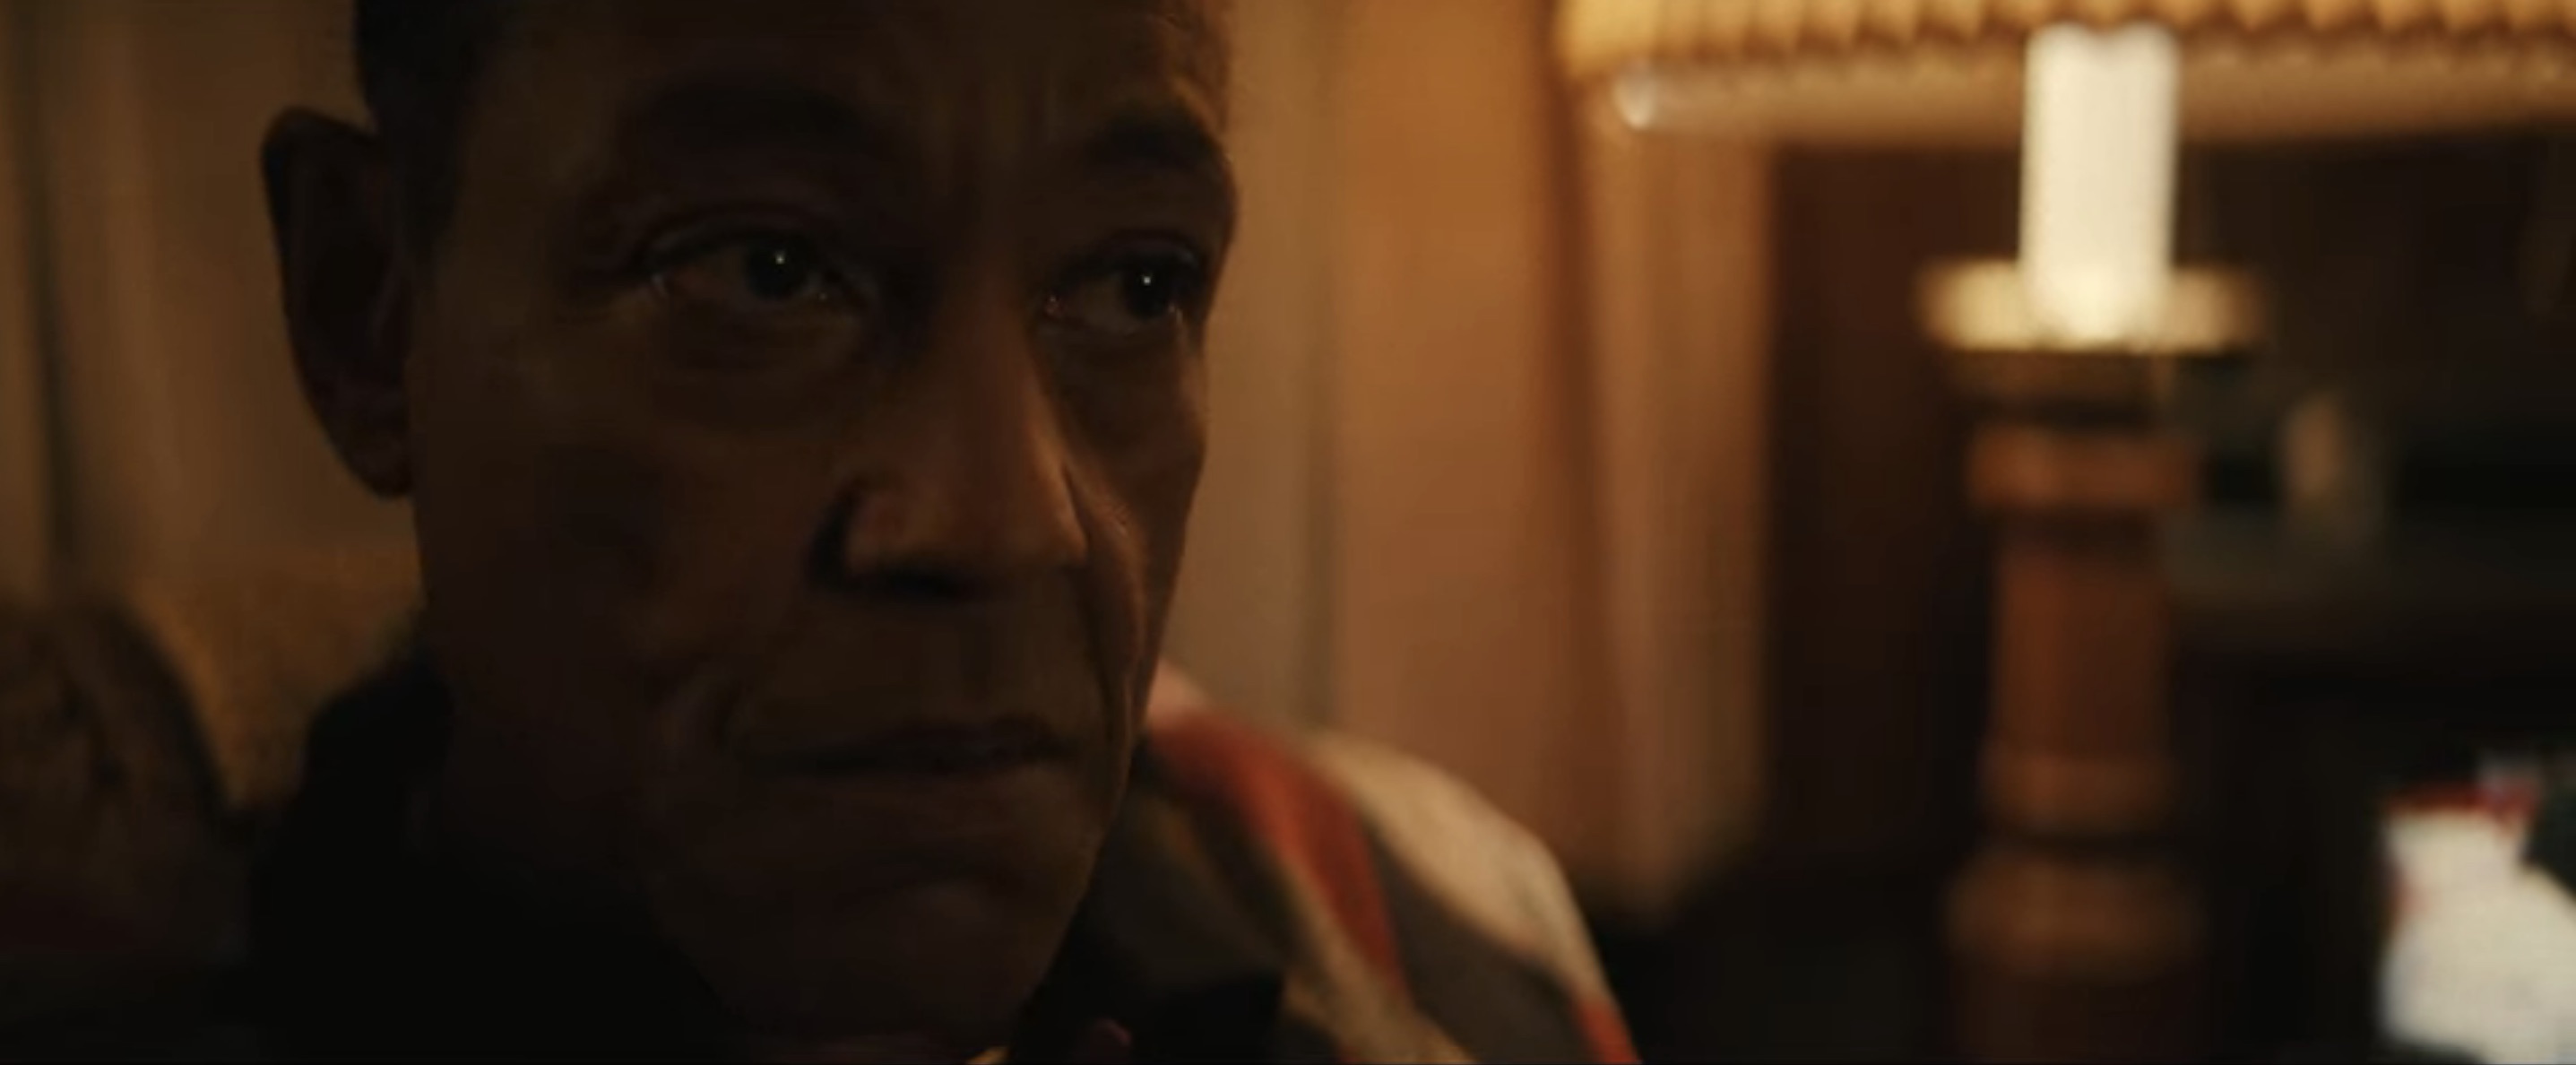 Beauty Cast on Netflix - Giancarlo Esposito as Beauty's Father